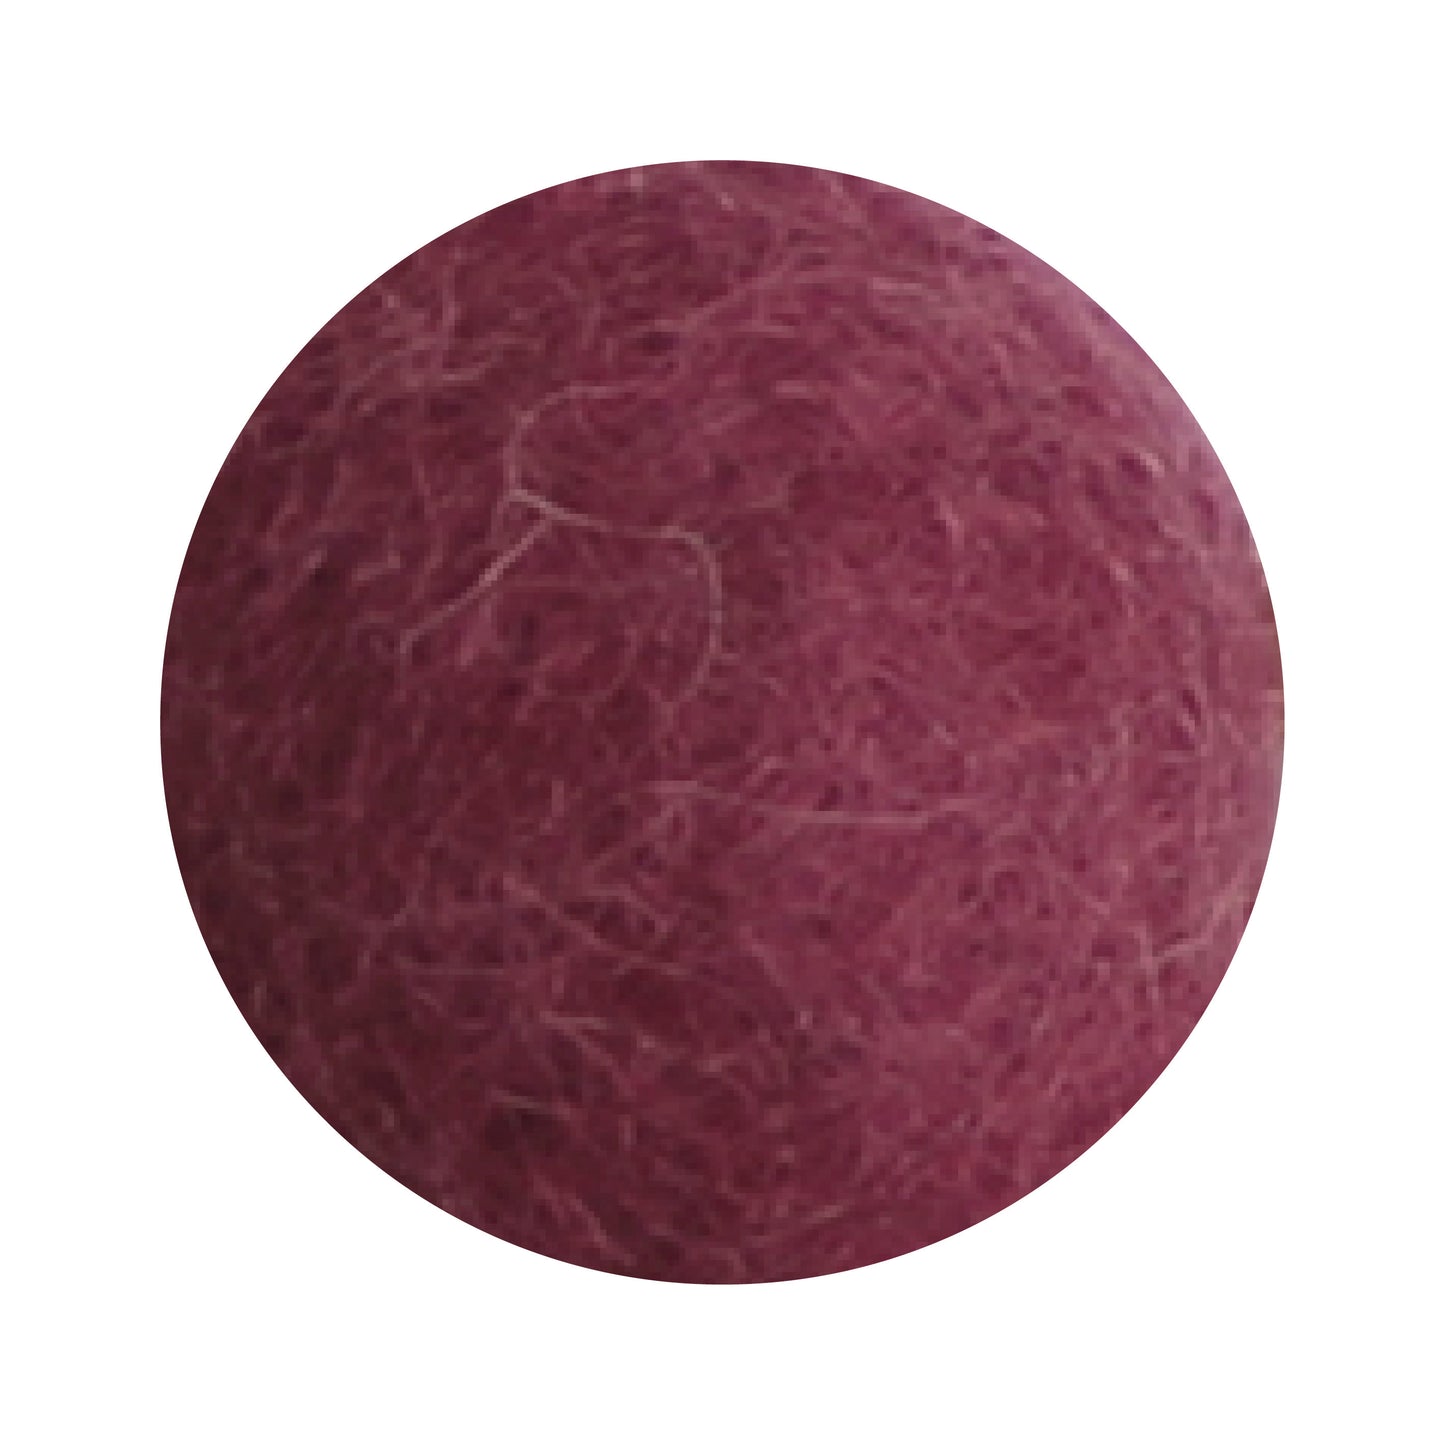 Gry & Sif - Blomst, Wine Red Ø3cm